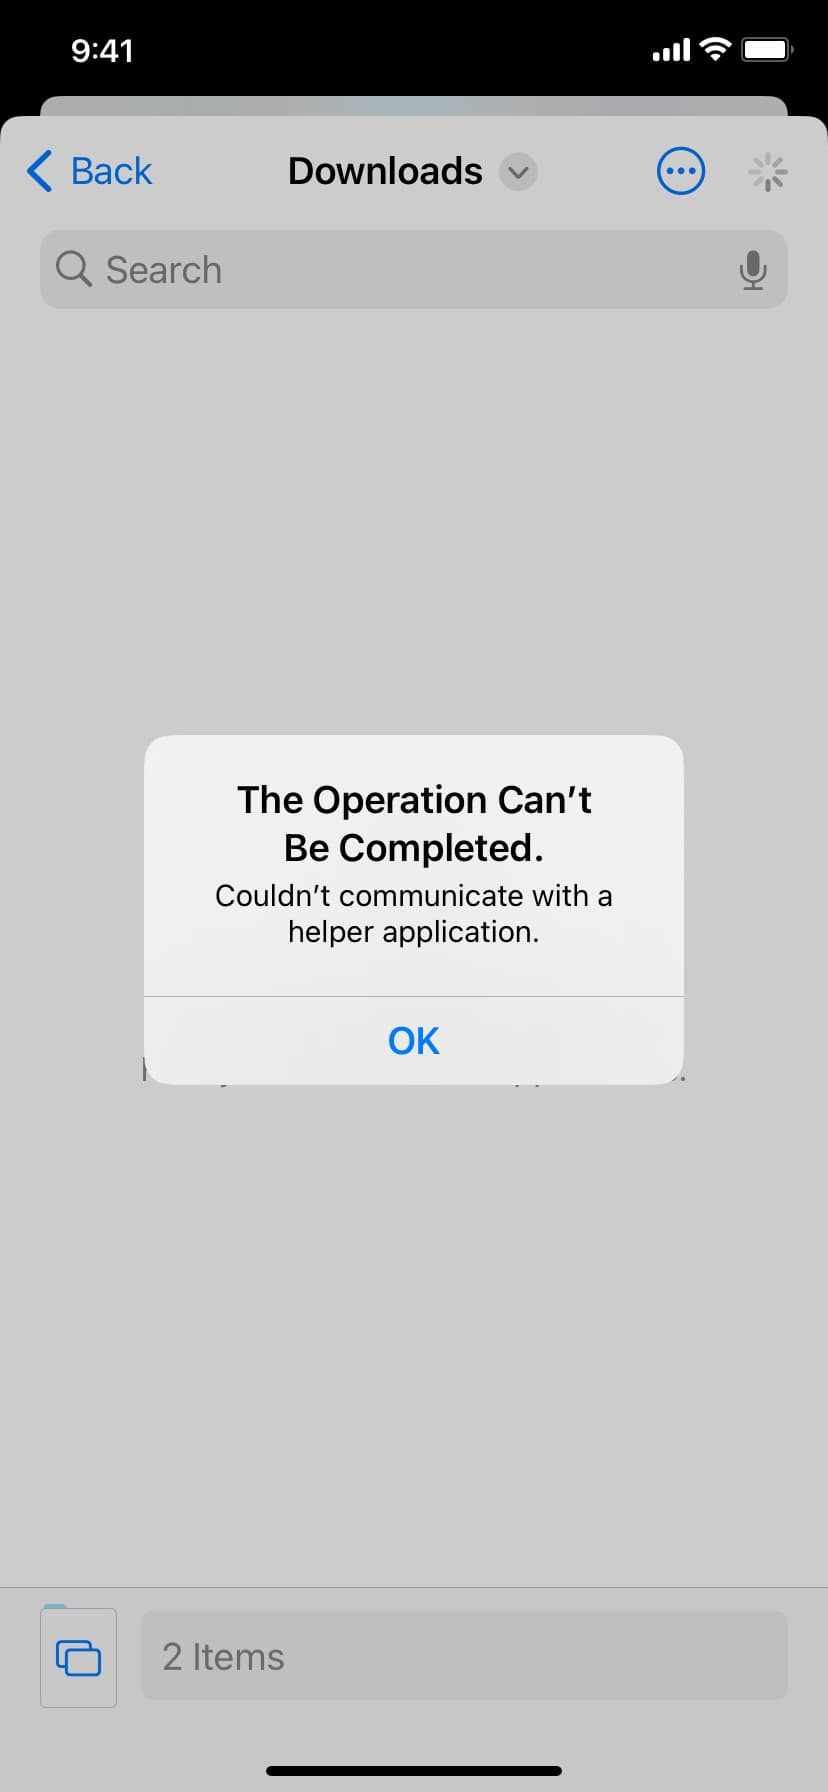 The Operation Cant Be Completed error in iPhone Files app